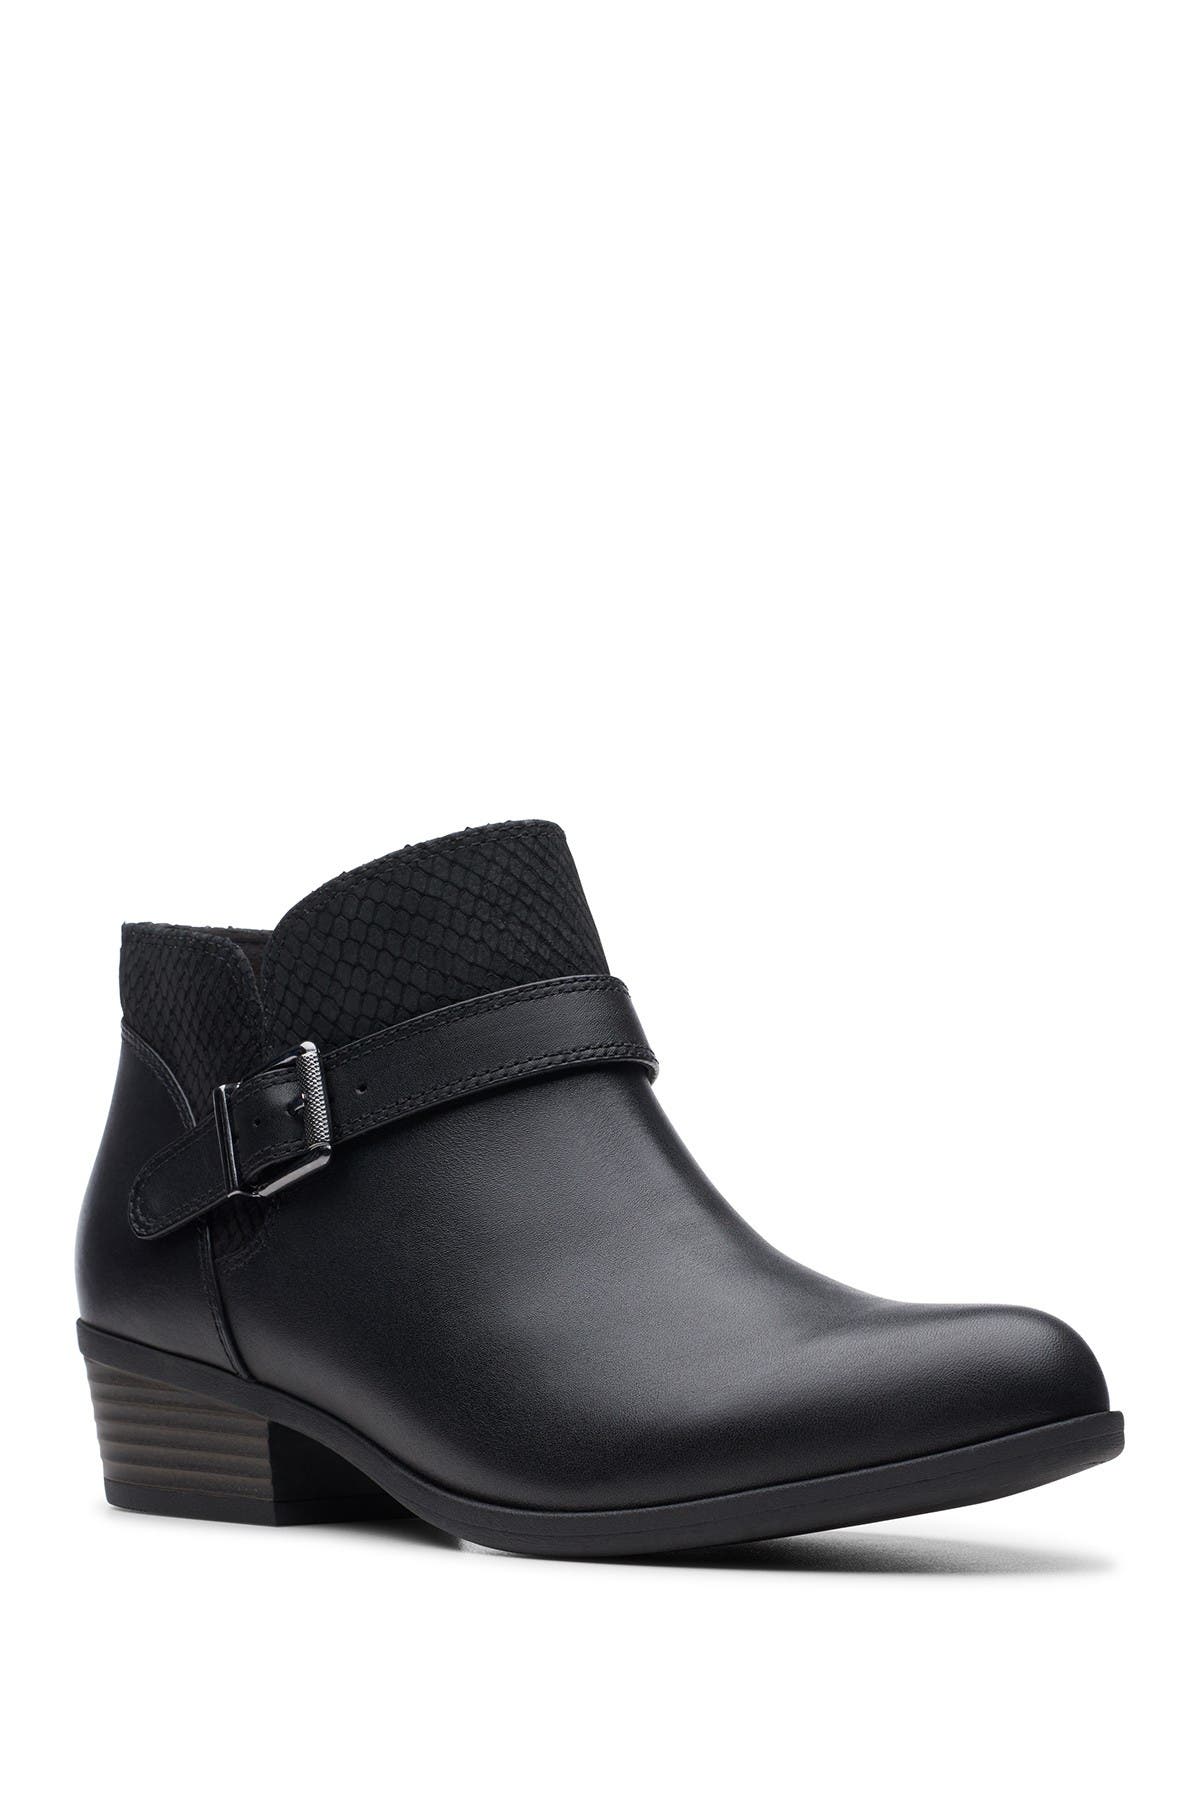 Clarks | Addiy Sharilyn Ankle Boot - Wide Width Available | Nordstrom Rack